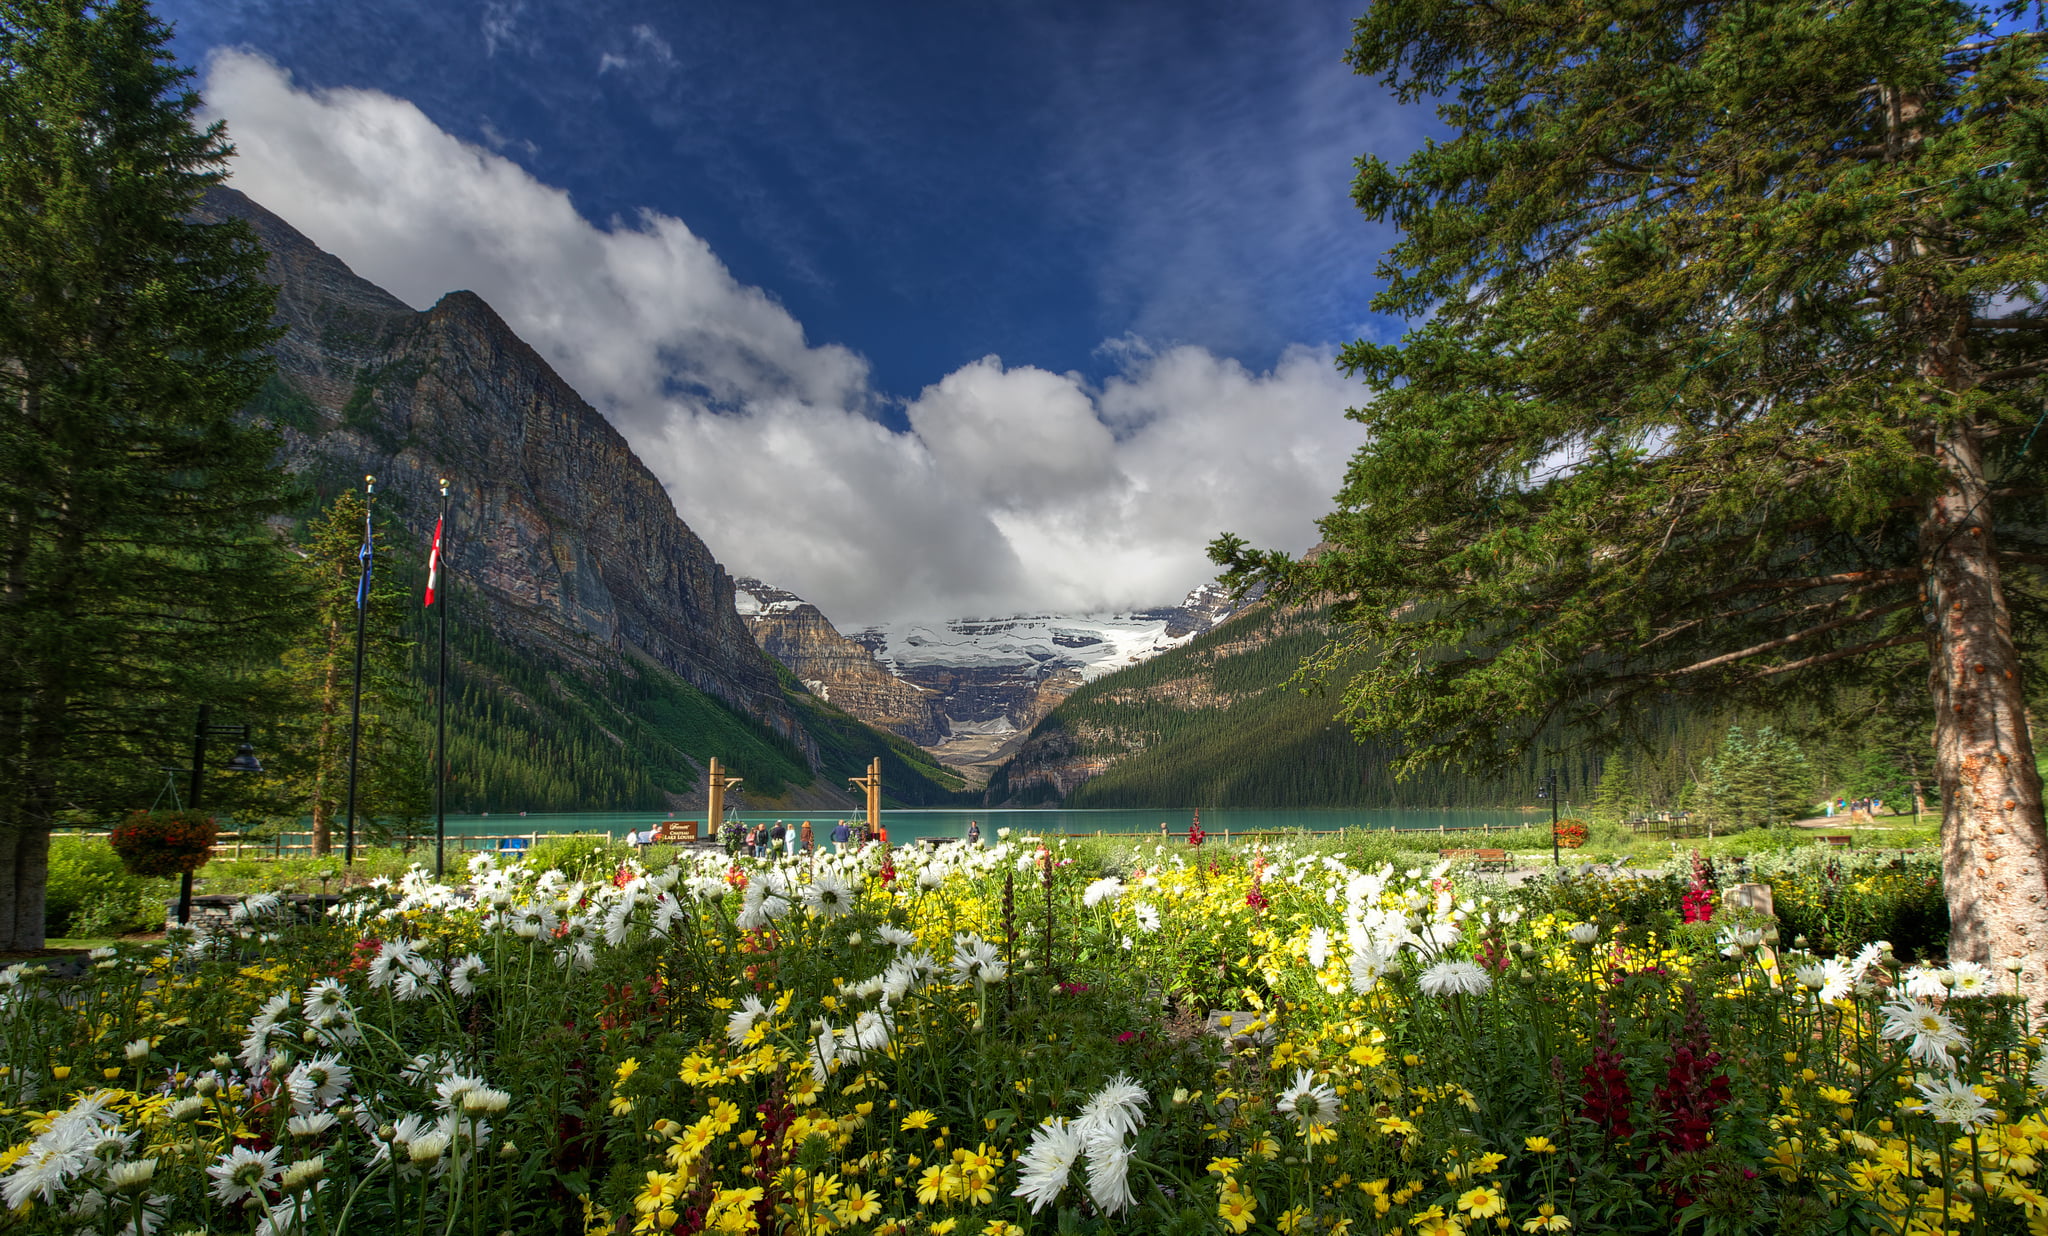 white and yellow daisies, trees, flowers, mountains, nature, lake